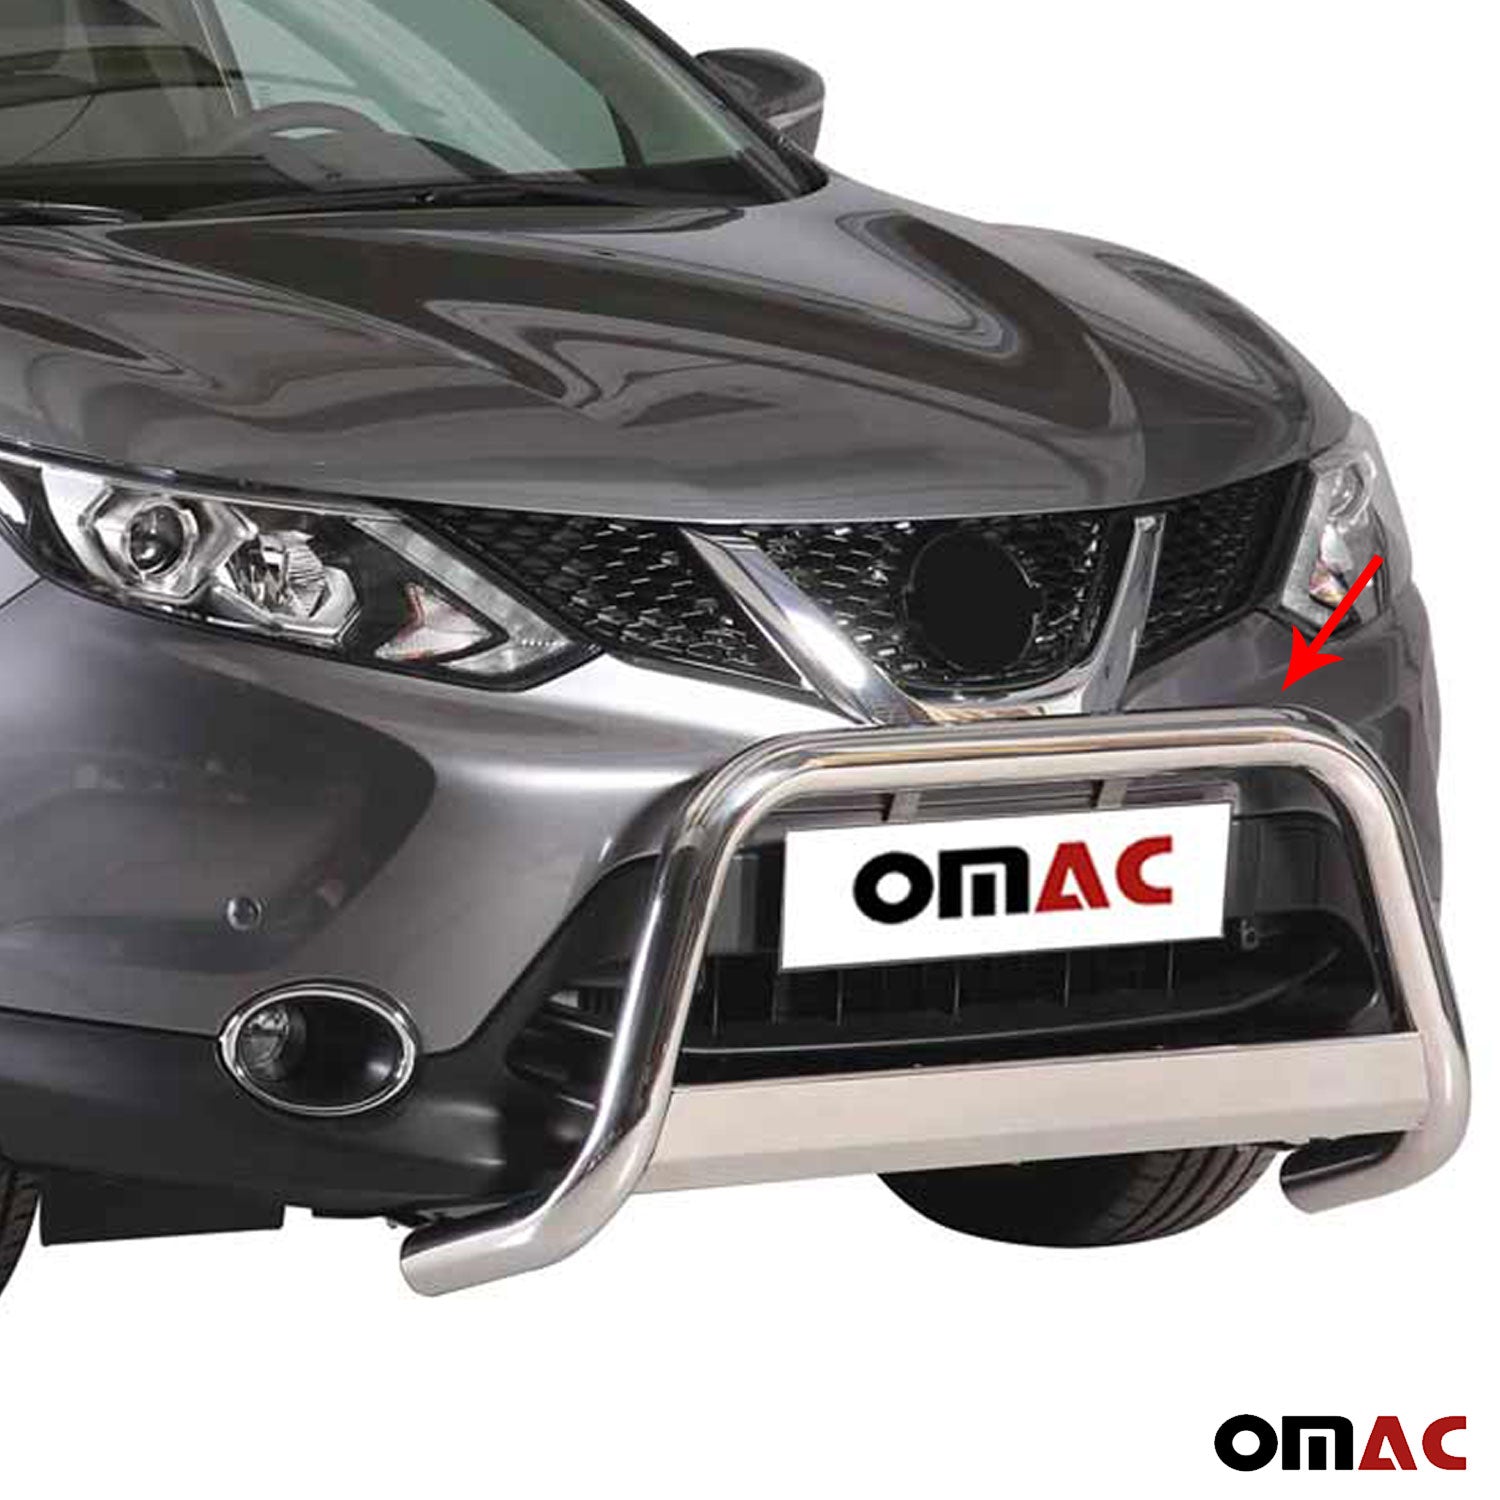 Stainless steel front guard for Nissan Qashqai 2018-2021 Gra